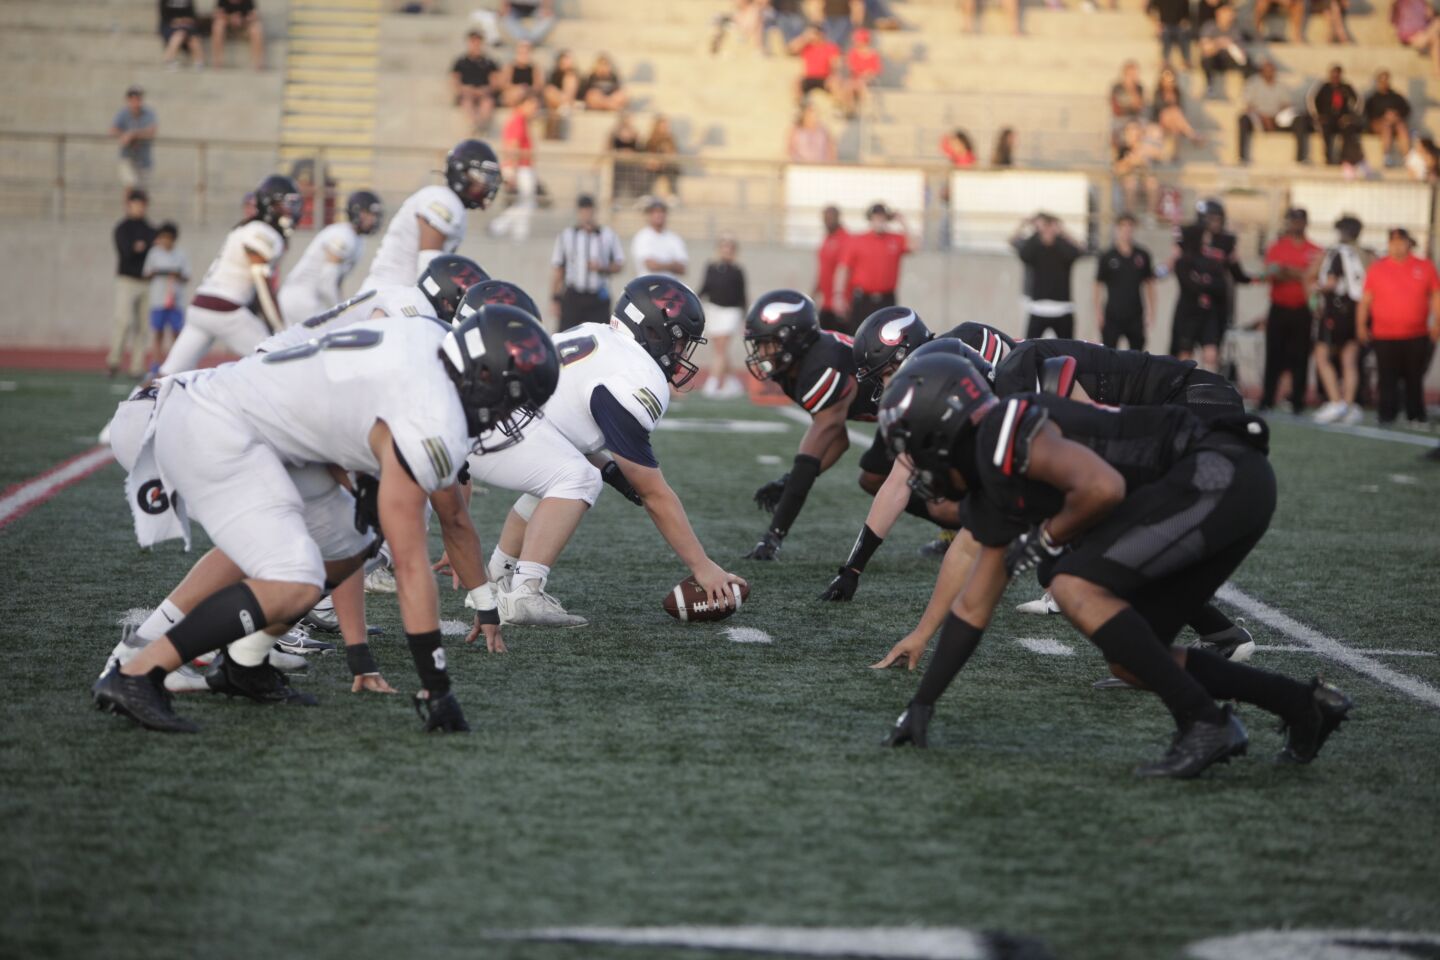 The Bishop's School Knights and the La Jolla High School Vikings square off in their season opener Aug. 18.